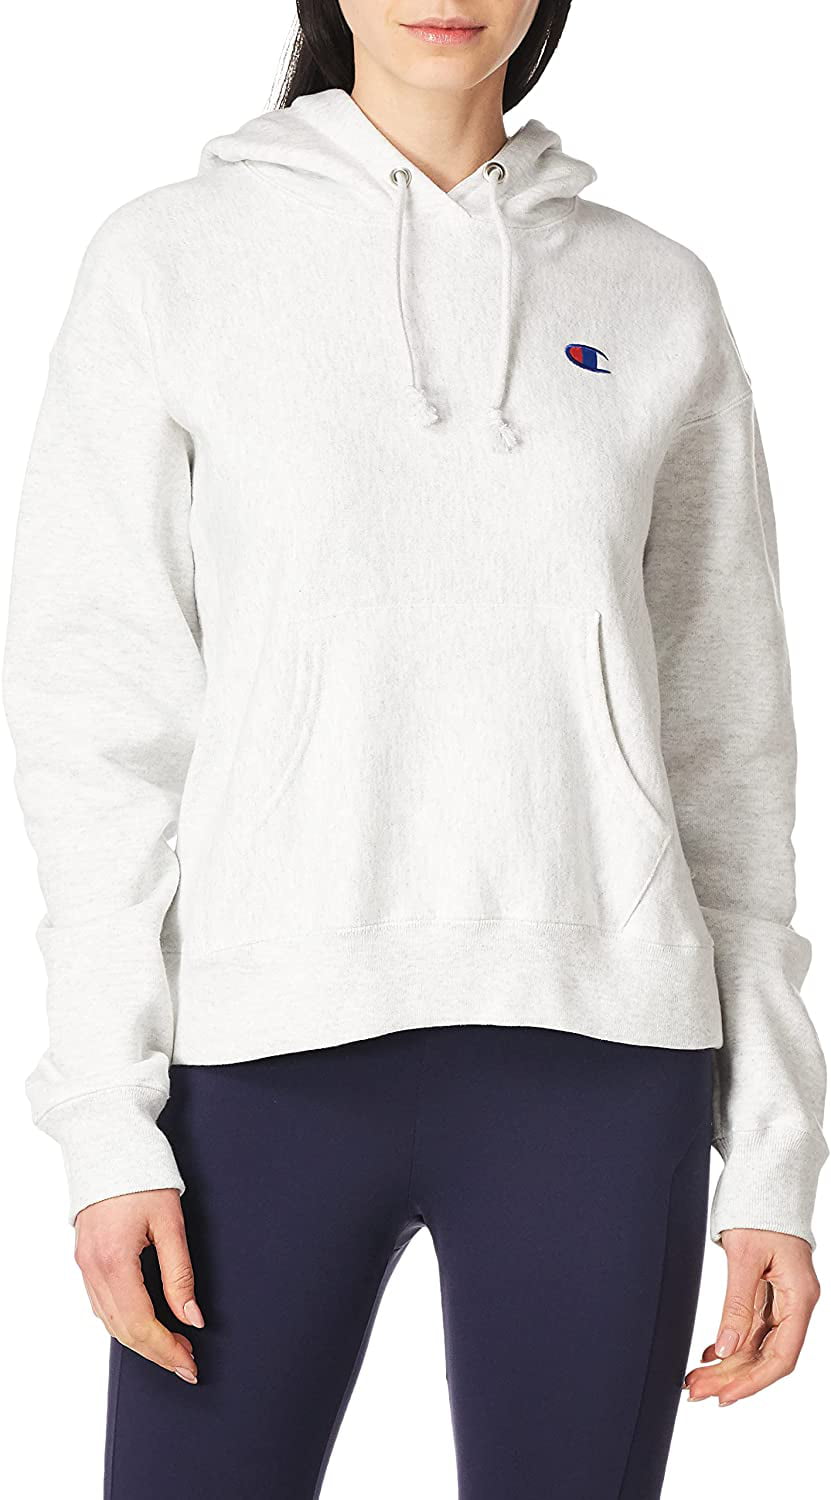 Relaxed Reverse Weave Hoodie, Left Chest C X-Small Gfs Silver Grey-y06145 - Walmart.com